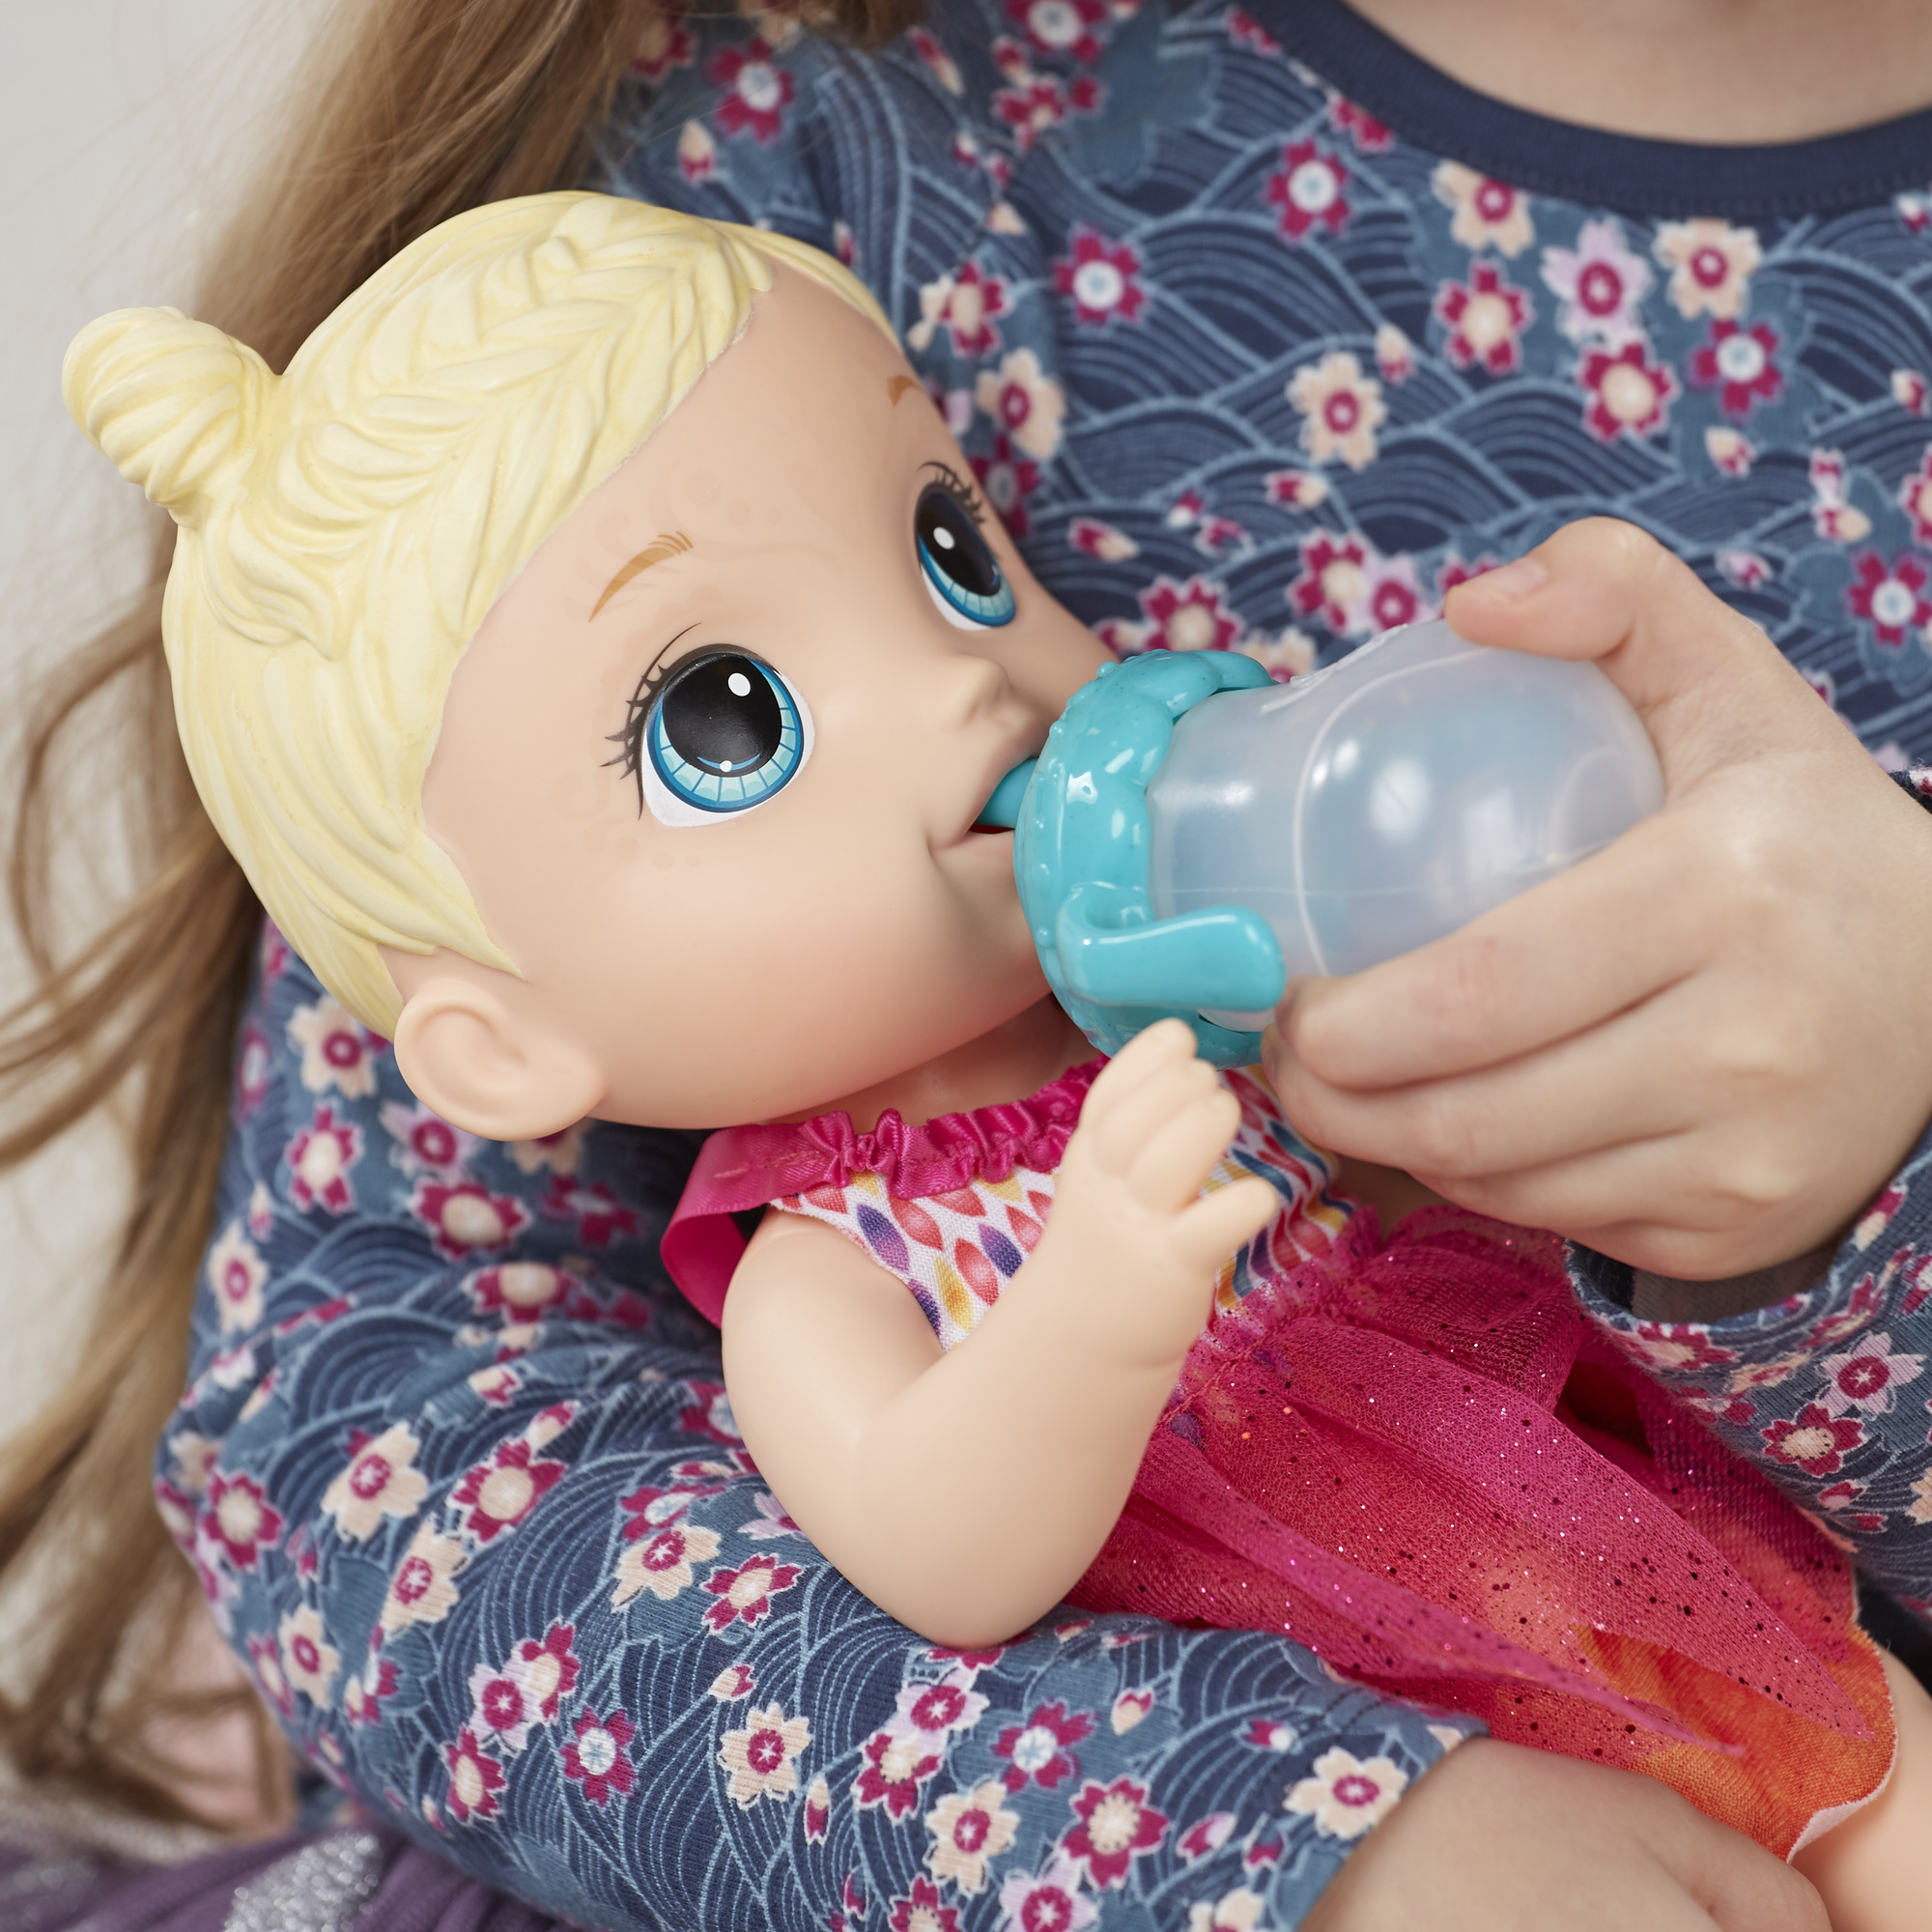 Baby Alive: Face Paint Fairy Blonde Hair Doll Playset - image 5 of 10